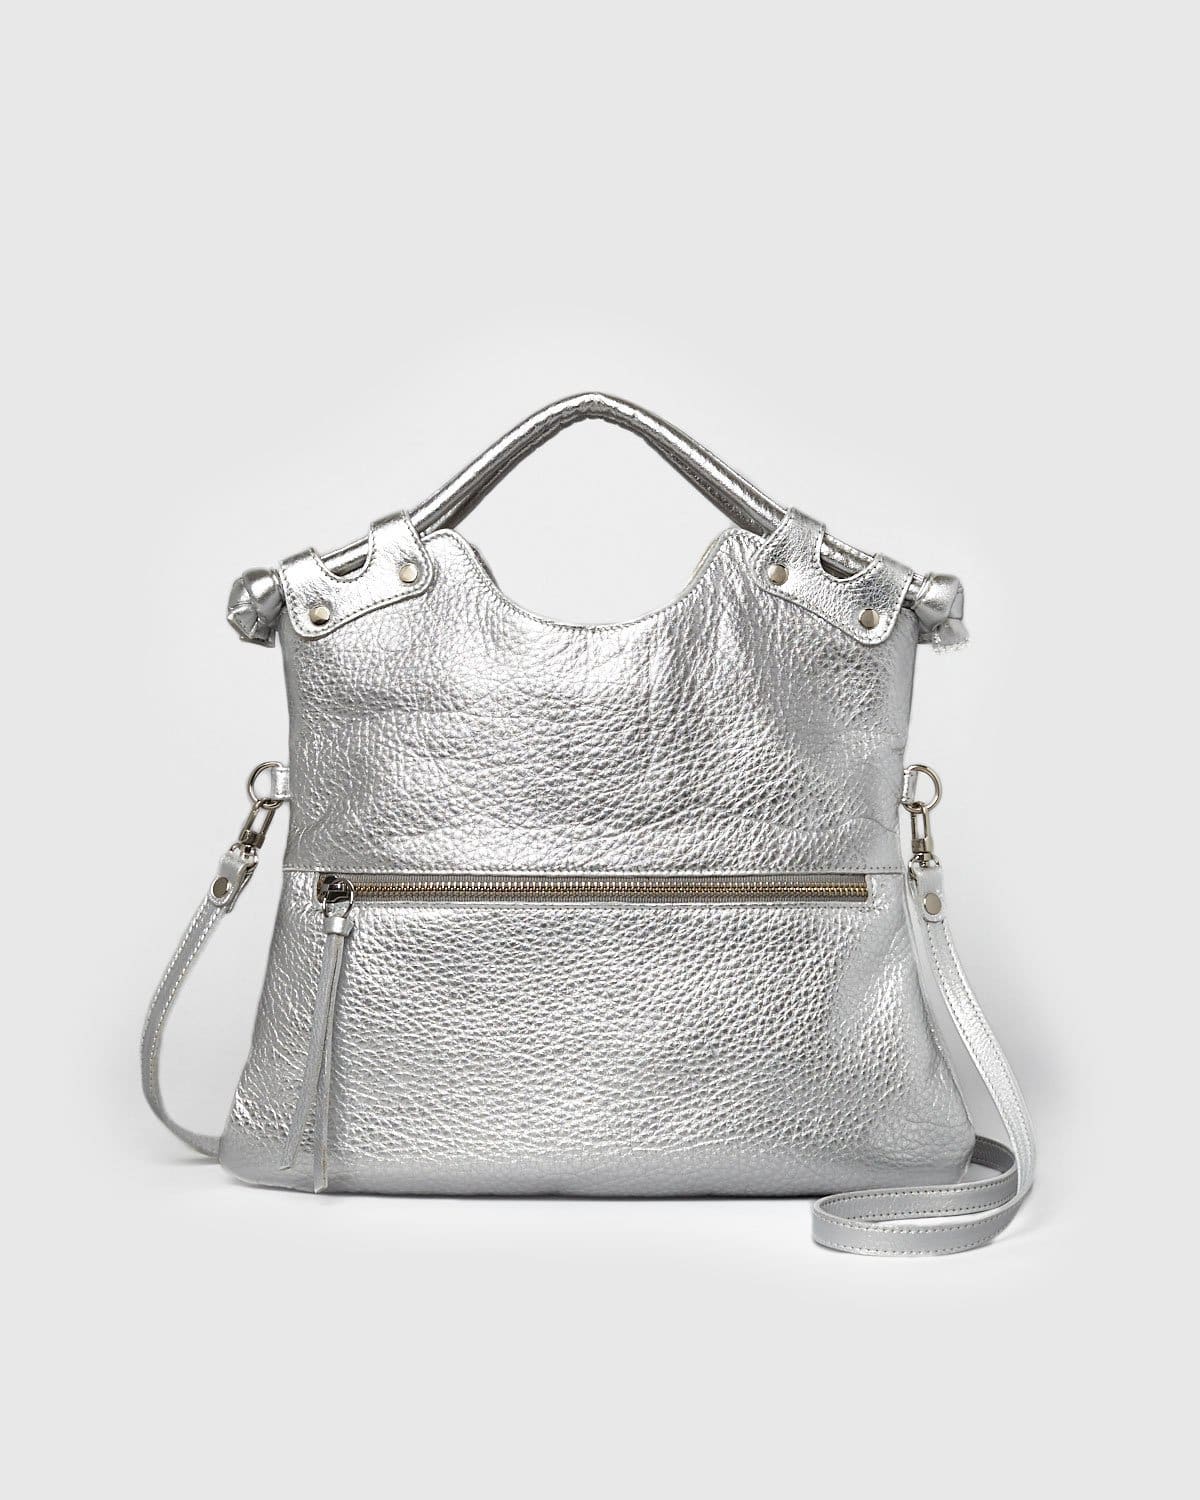 Brooklyn - Off White Leather Handbag Made in NYC | Pietro NYC